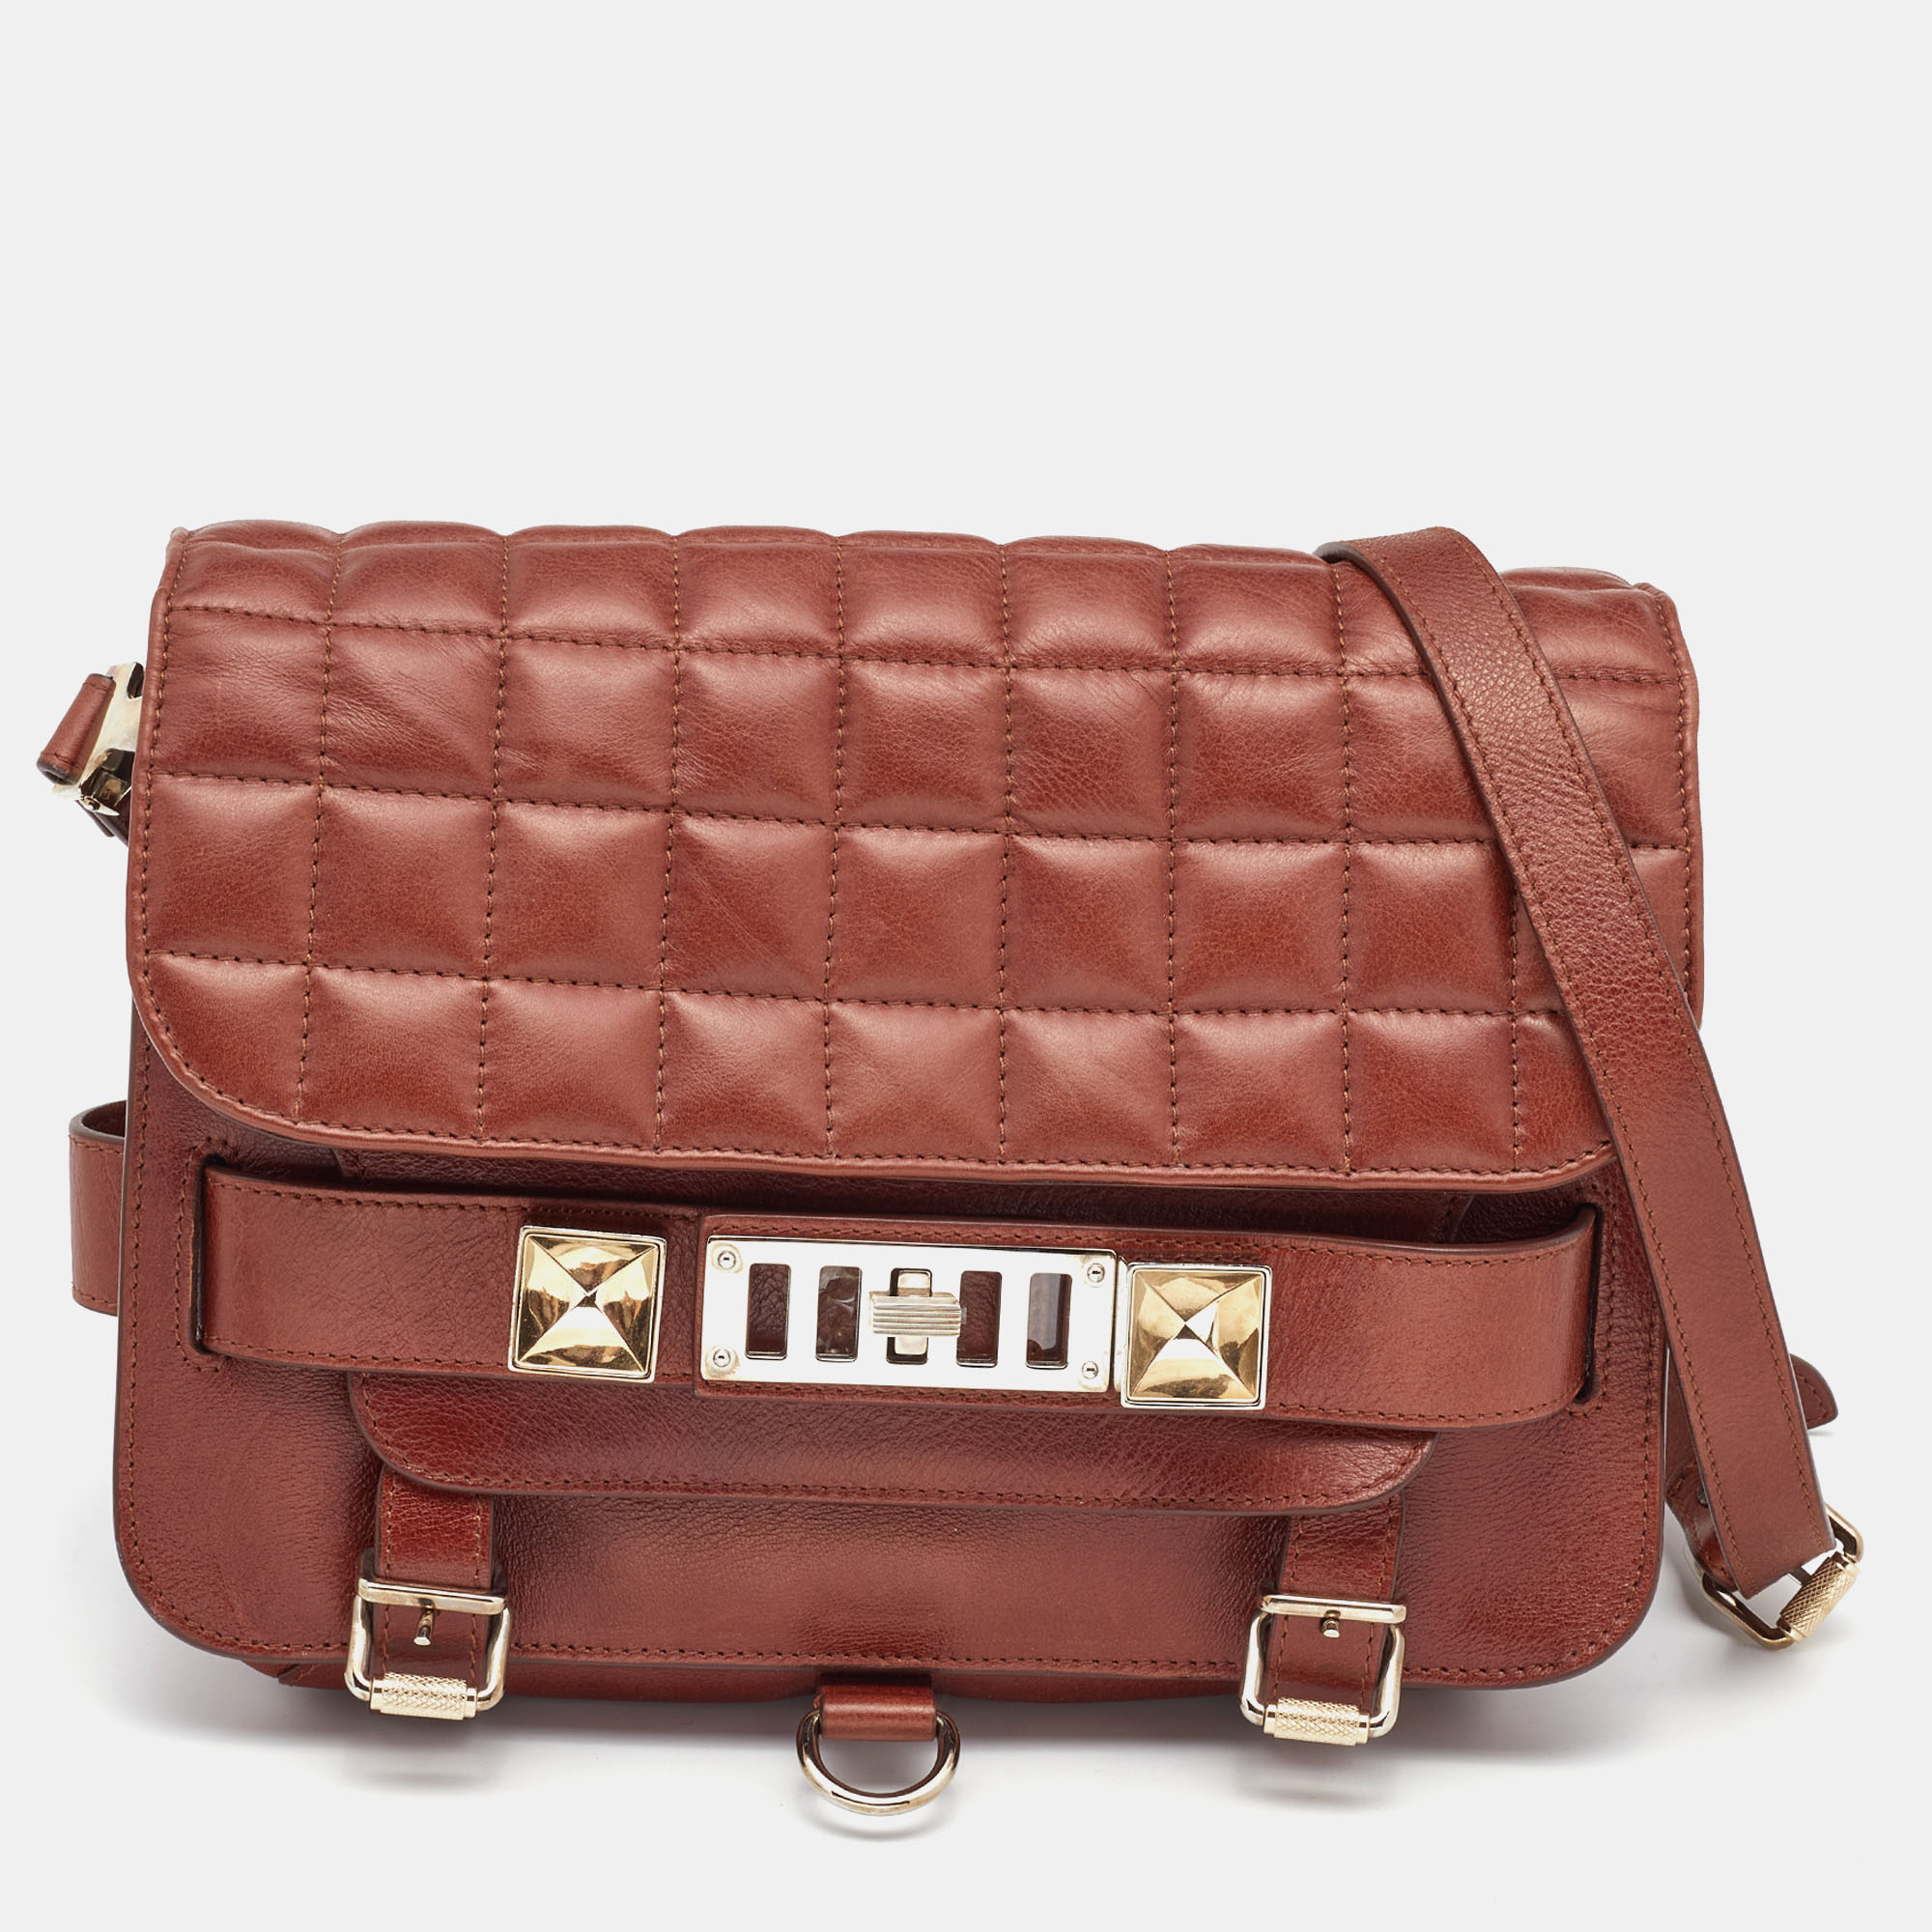 Proenza Schouler Brown Quilted Leather BG 111th Anniversary PS11 Shoulder Bag